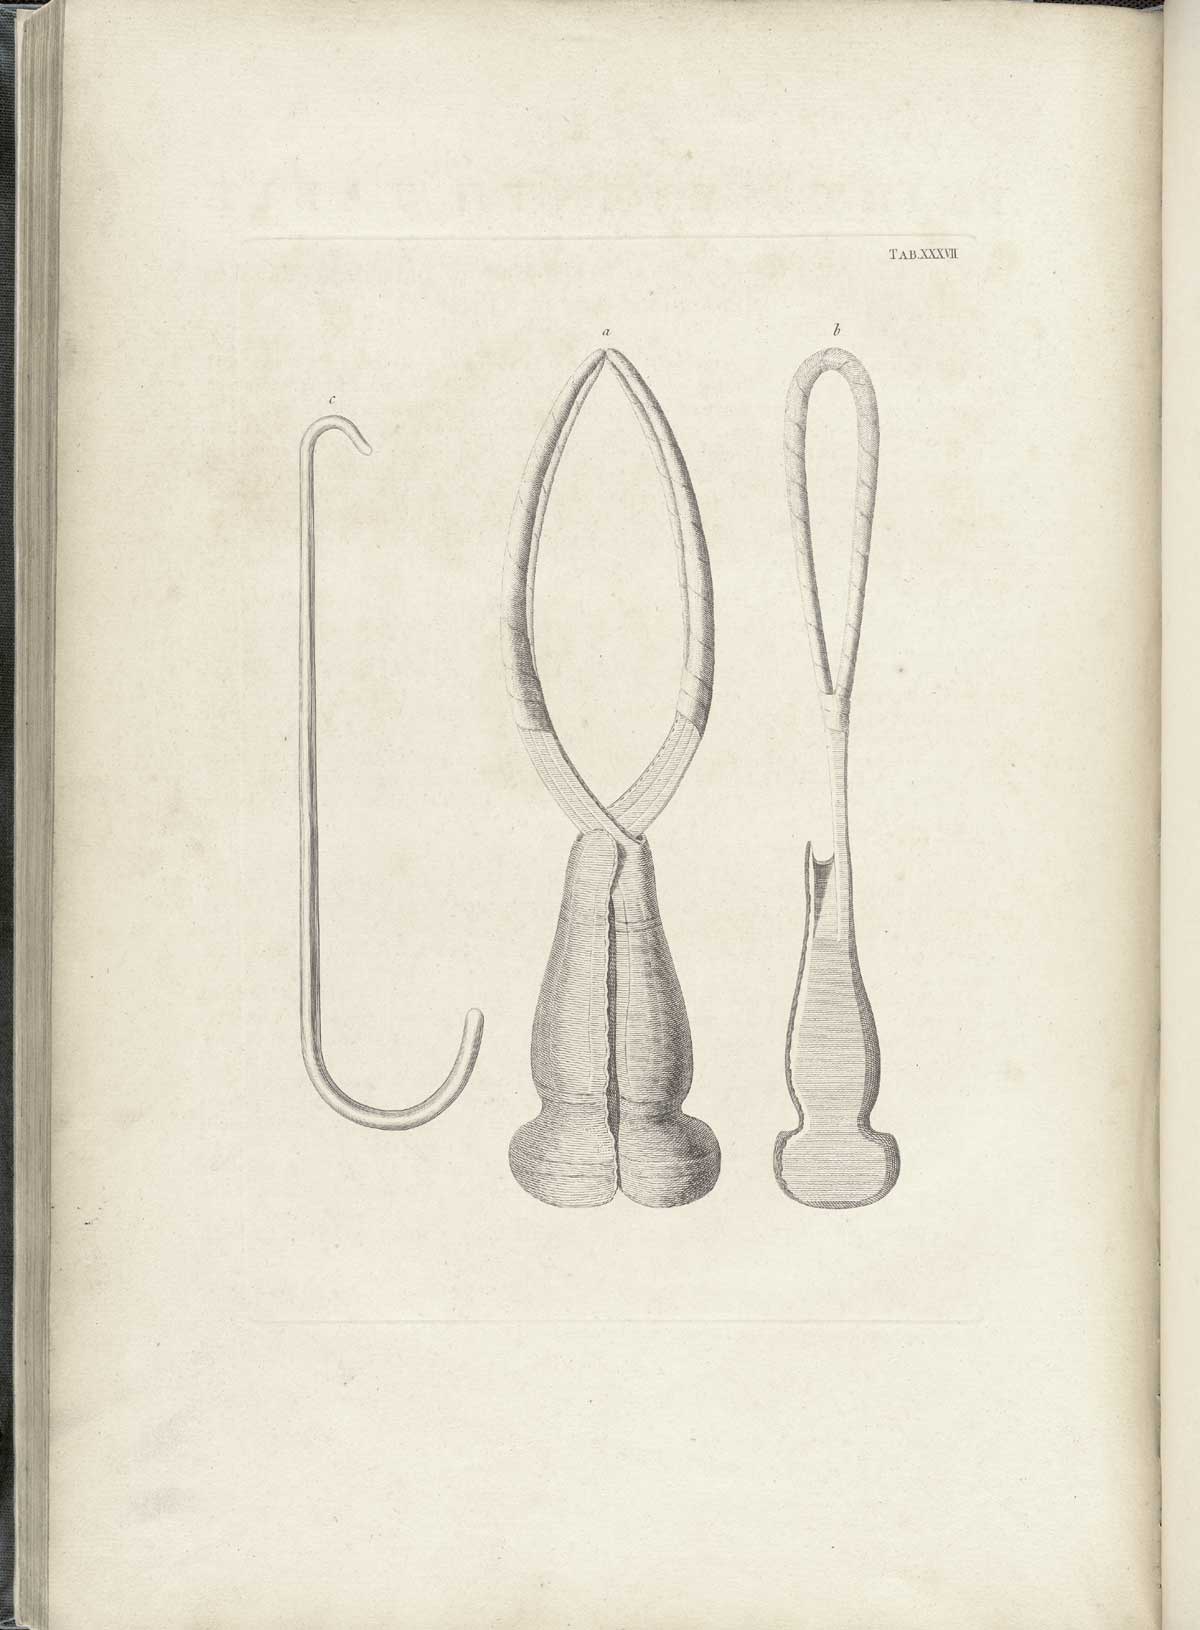 Table 37 of William Smellie's A sett of anatomical tables, with explanations, and an abridgment, of the practice of midwifery, featuring a birthing hook and two types of forceps.